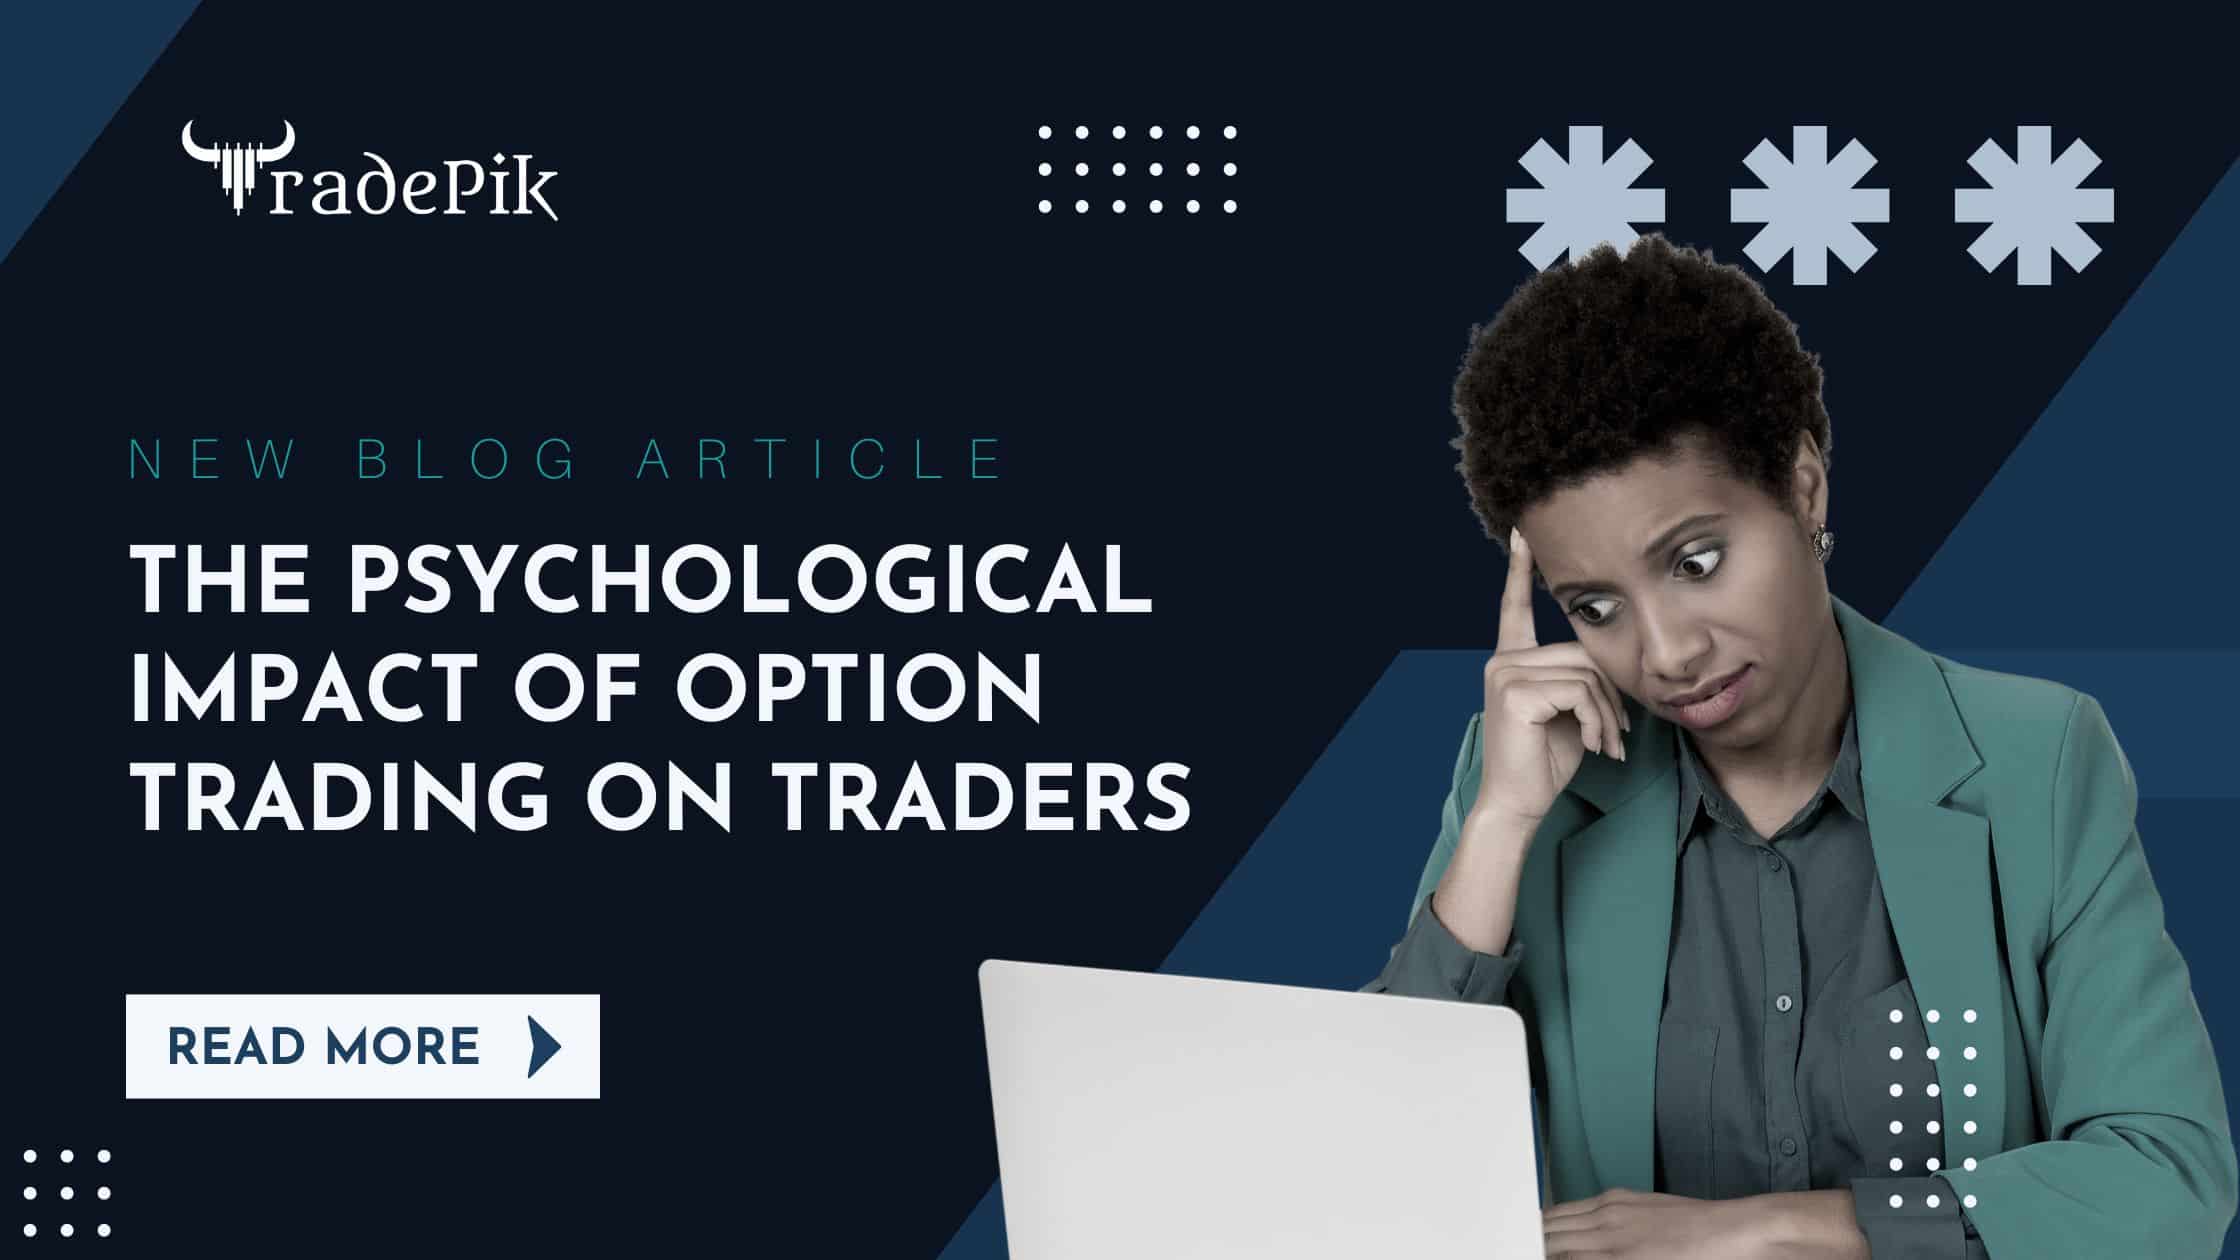 The psychological impact of option trading on traders